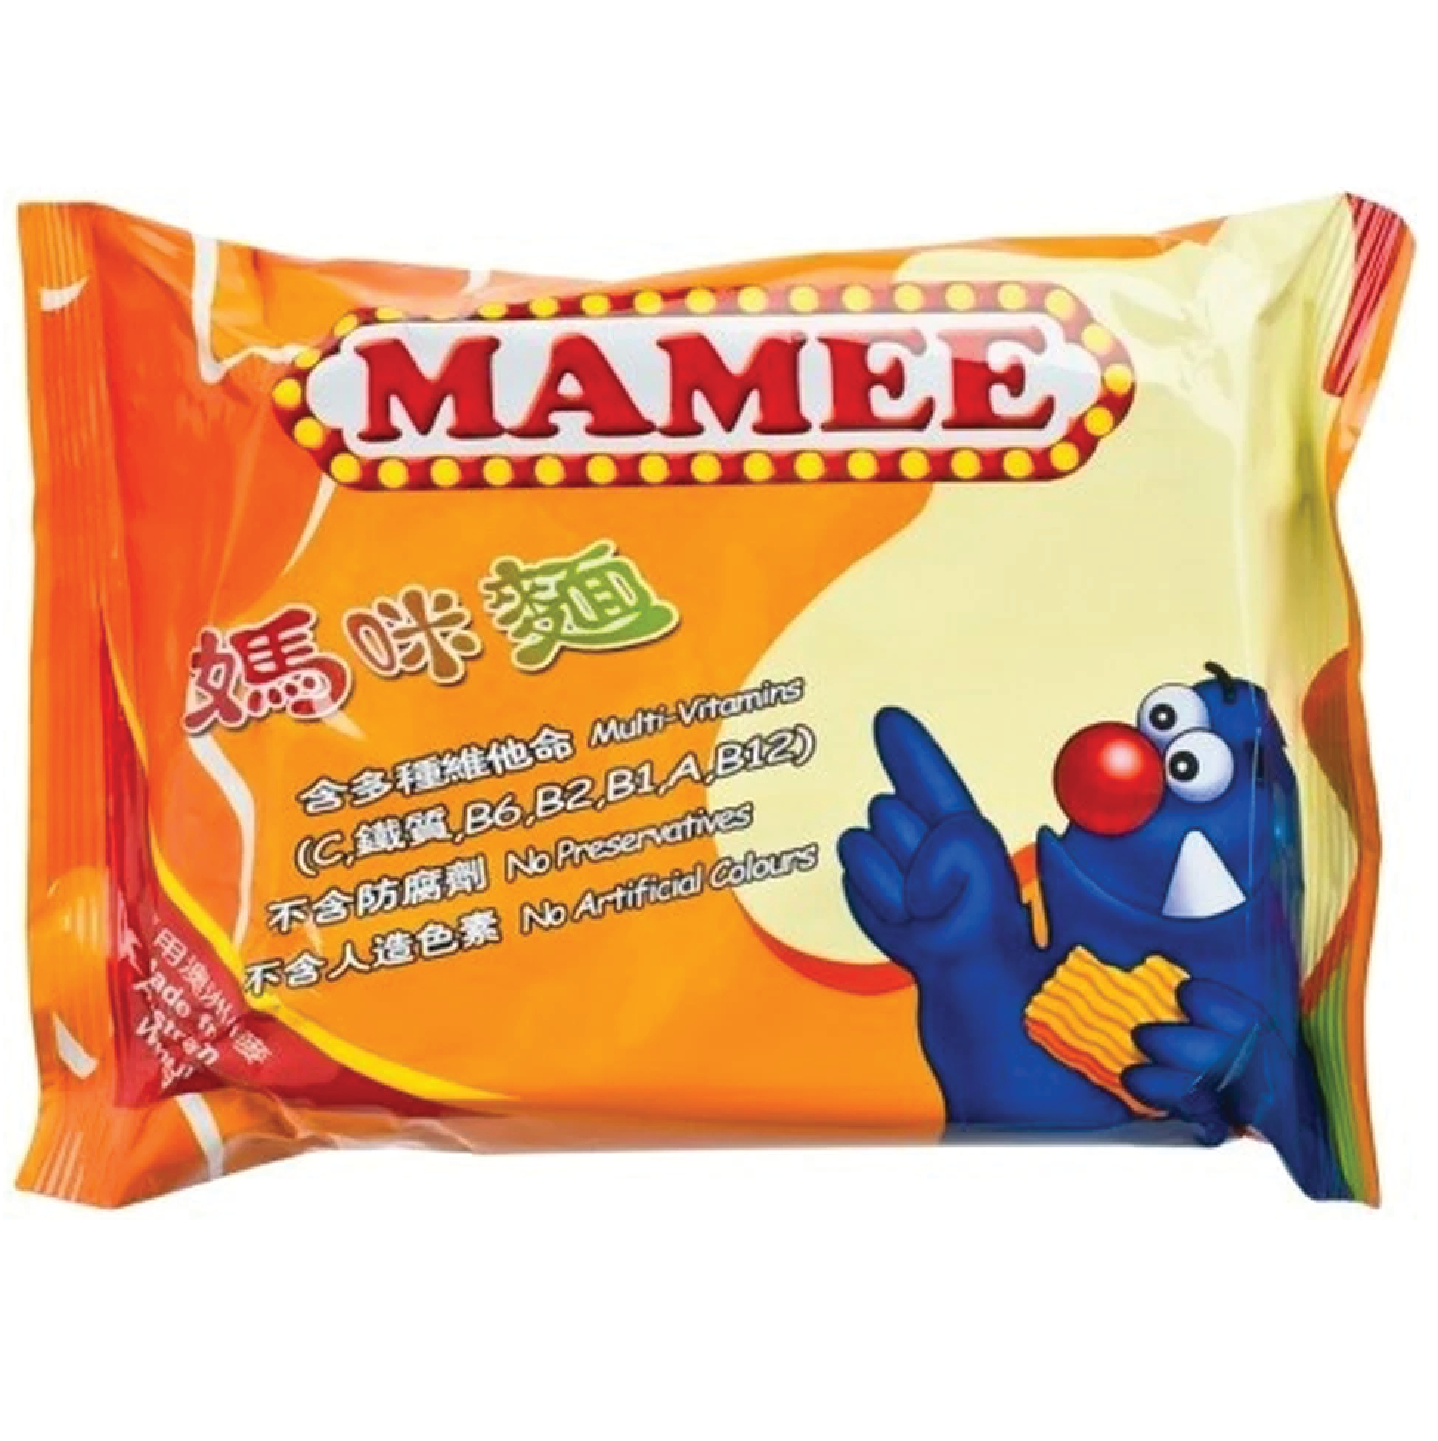 MAMEE SNACK NOODLES 60G 媽咪 媽咪麵 60G